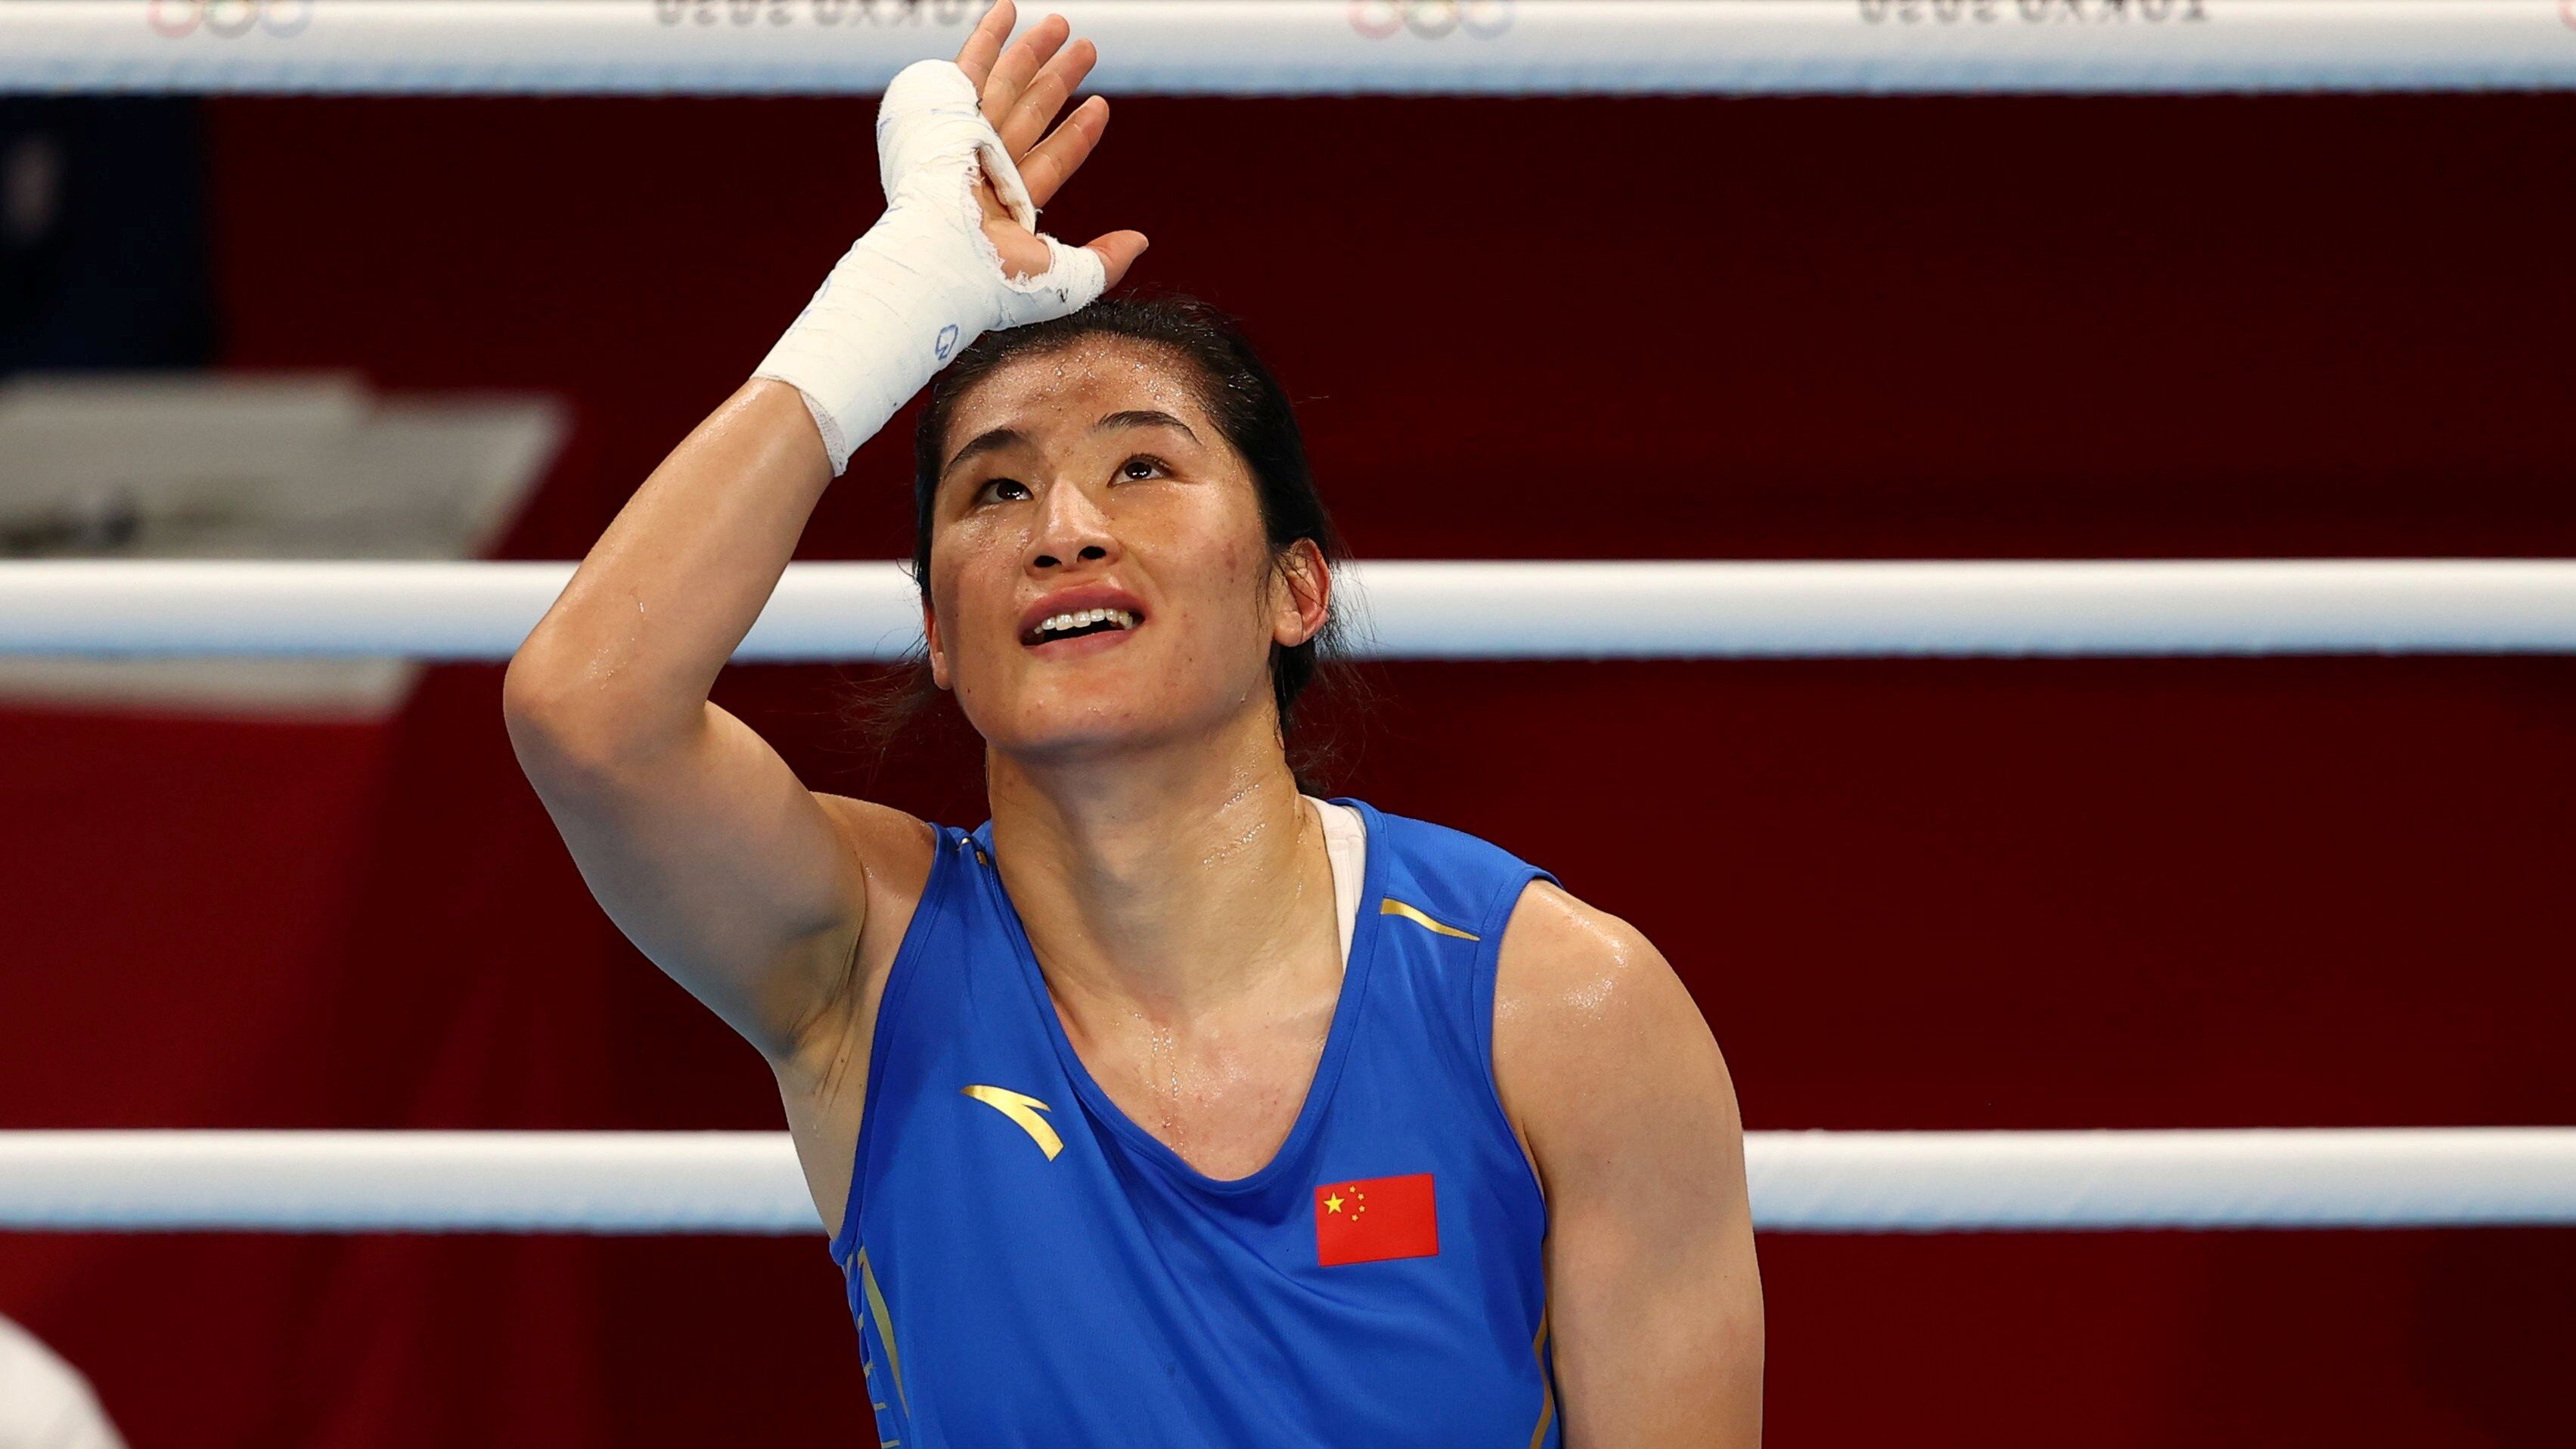 Li Qian of China celebrates her win against Zenfira Magomedalieva of the Russian Olympic Committee in the Tokyo 2020 Olympic Games boxing women’s middleweight semi-final. Photo: Reuters